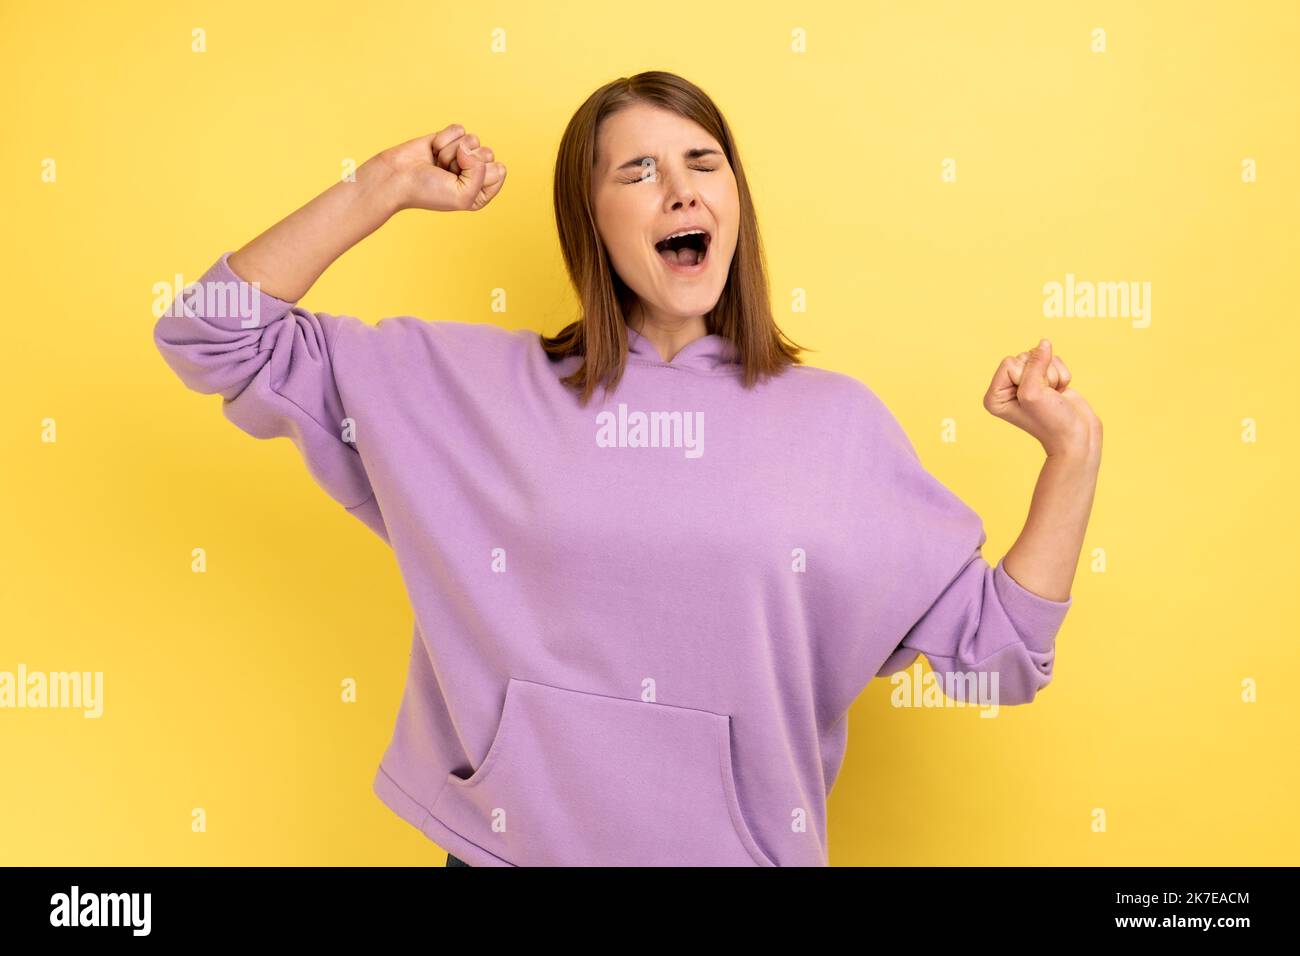 Portrait of young adult sleepless woman yawning and raising hands up, feeling fatigued, standing with close eyes, wearing purple hoodie. Indoor studio shot isolated on yellow background. Stock Photo